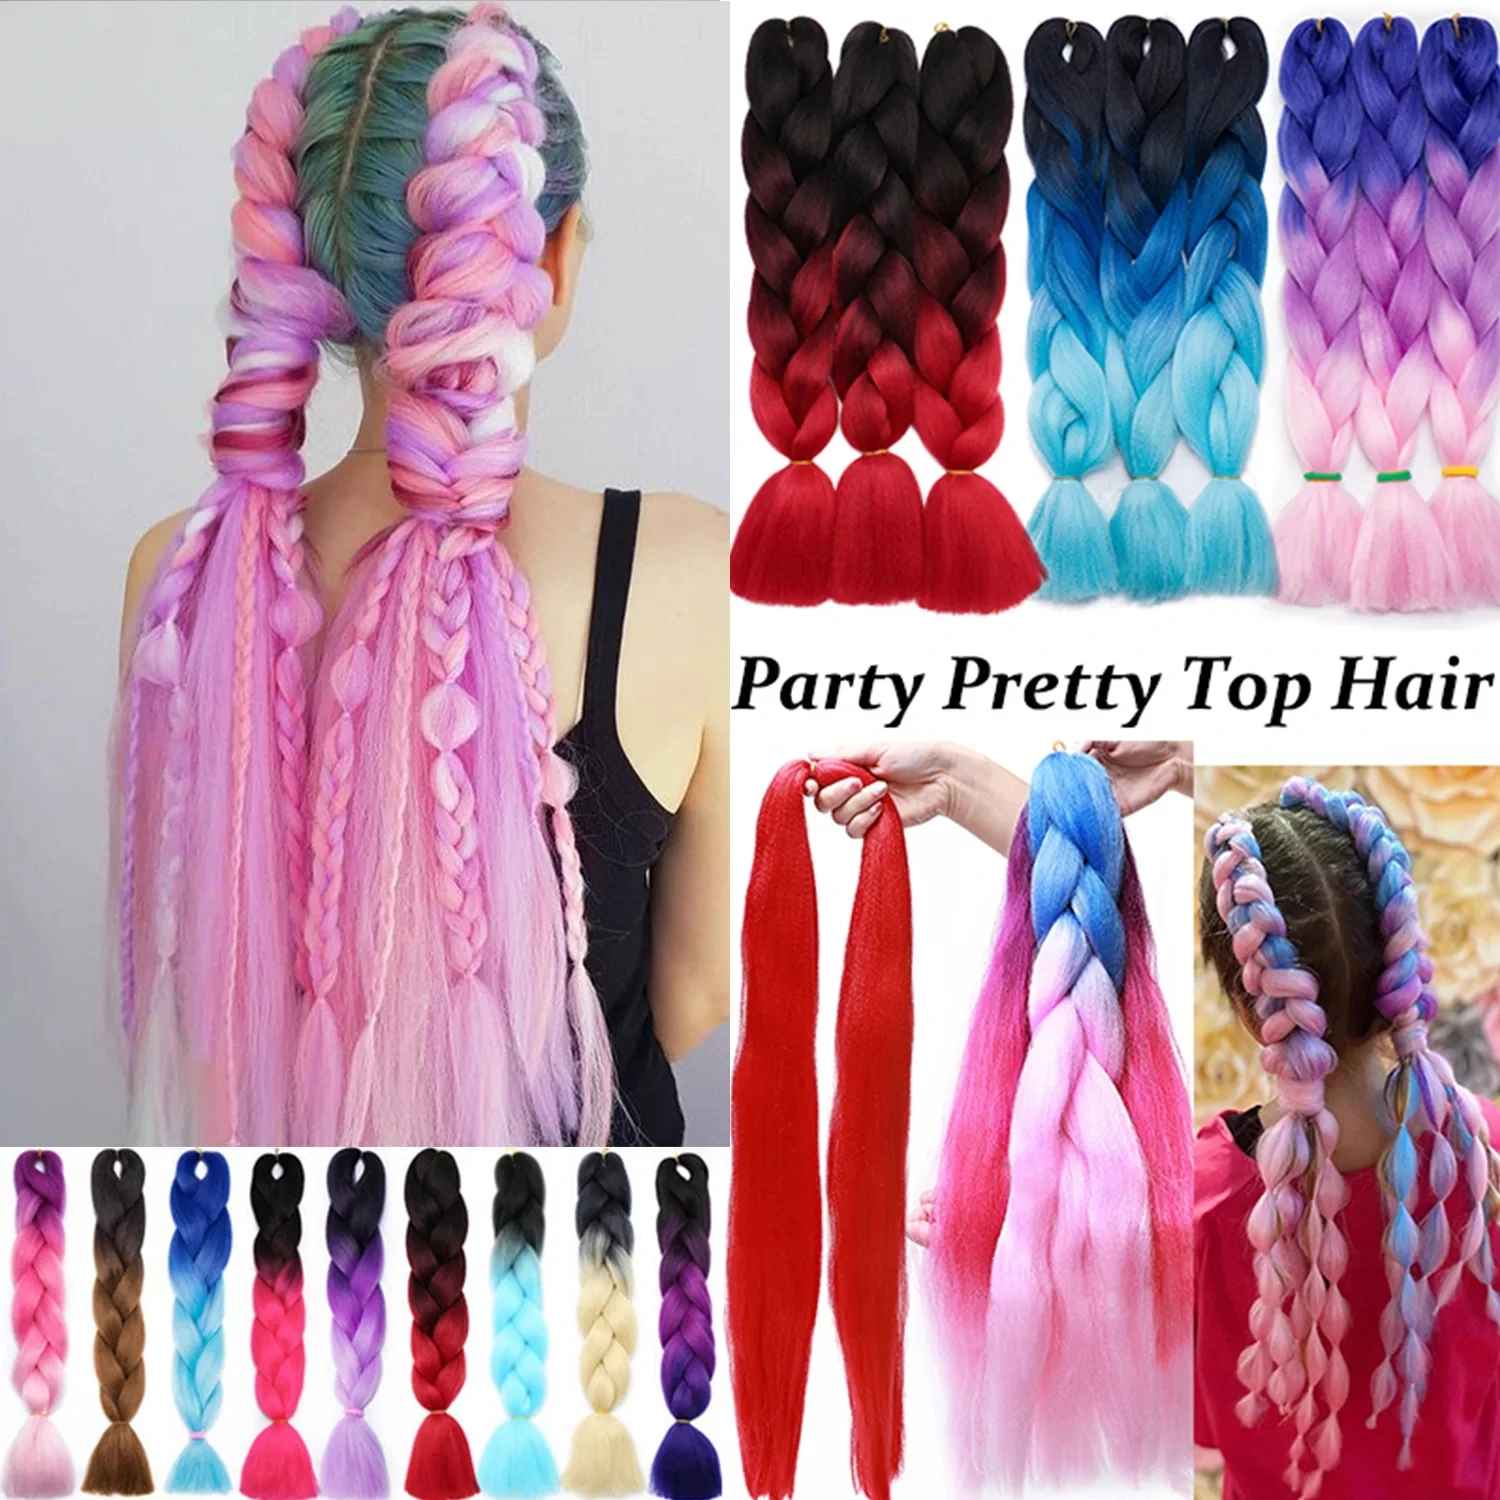 

100G 120 Colors Synthetic Braiding Hair Extensions Packs Ombre Braiding Hair For Women Wholesale 24" Jumbo Box Braids